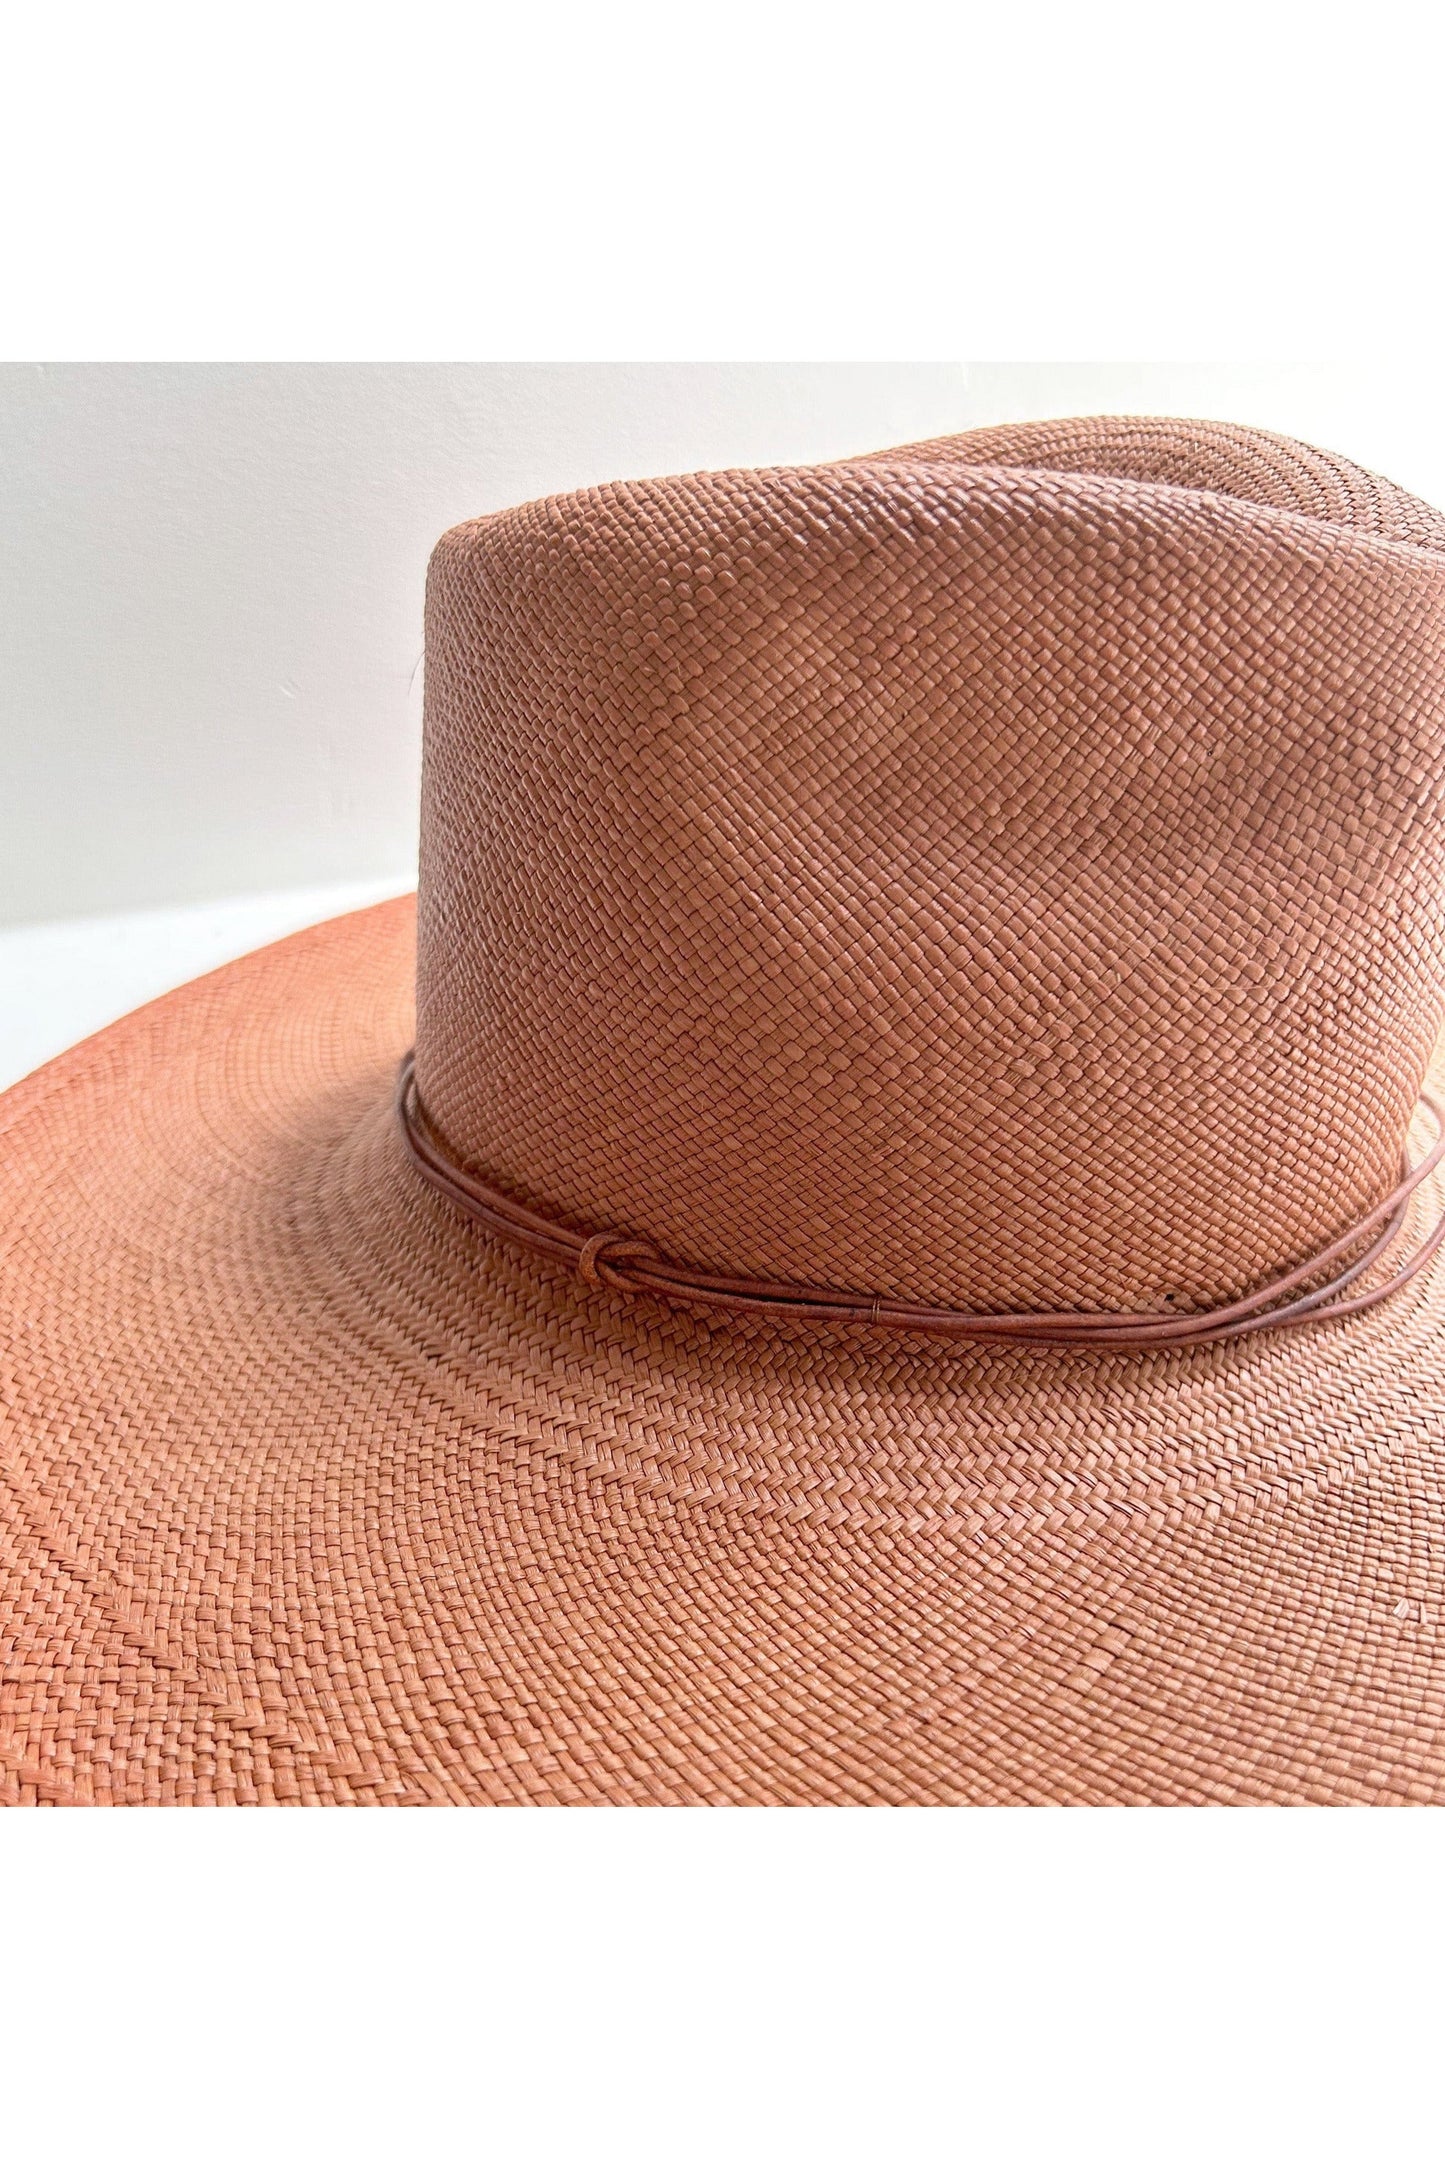 Wakefield Sun Hat in Panama Straw Accessories Brookes Boswell   